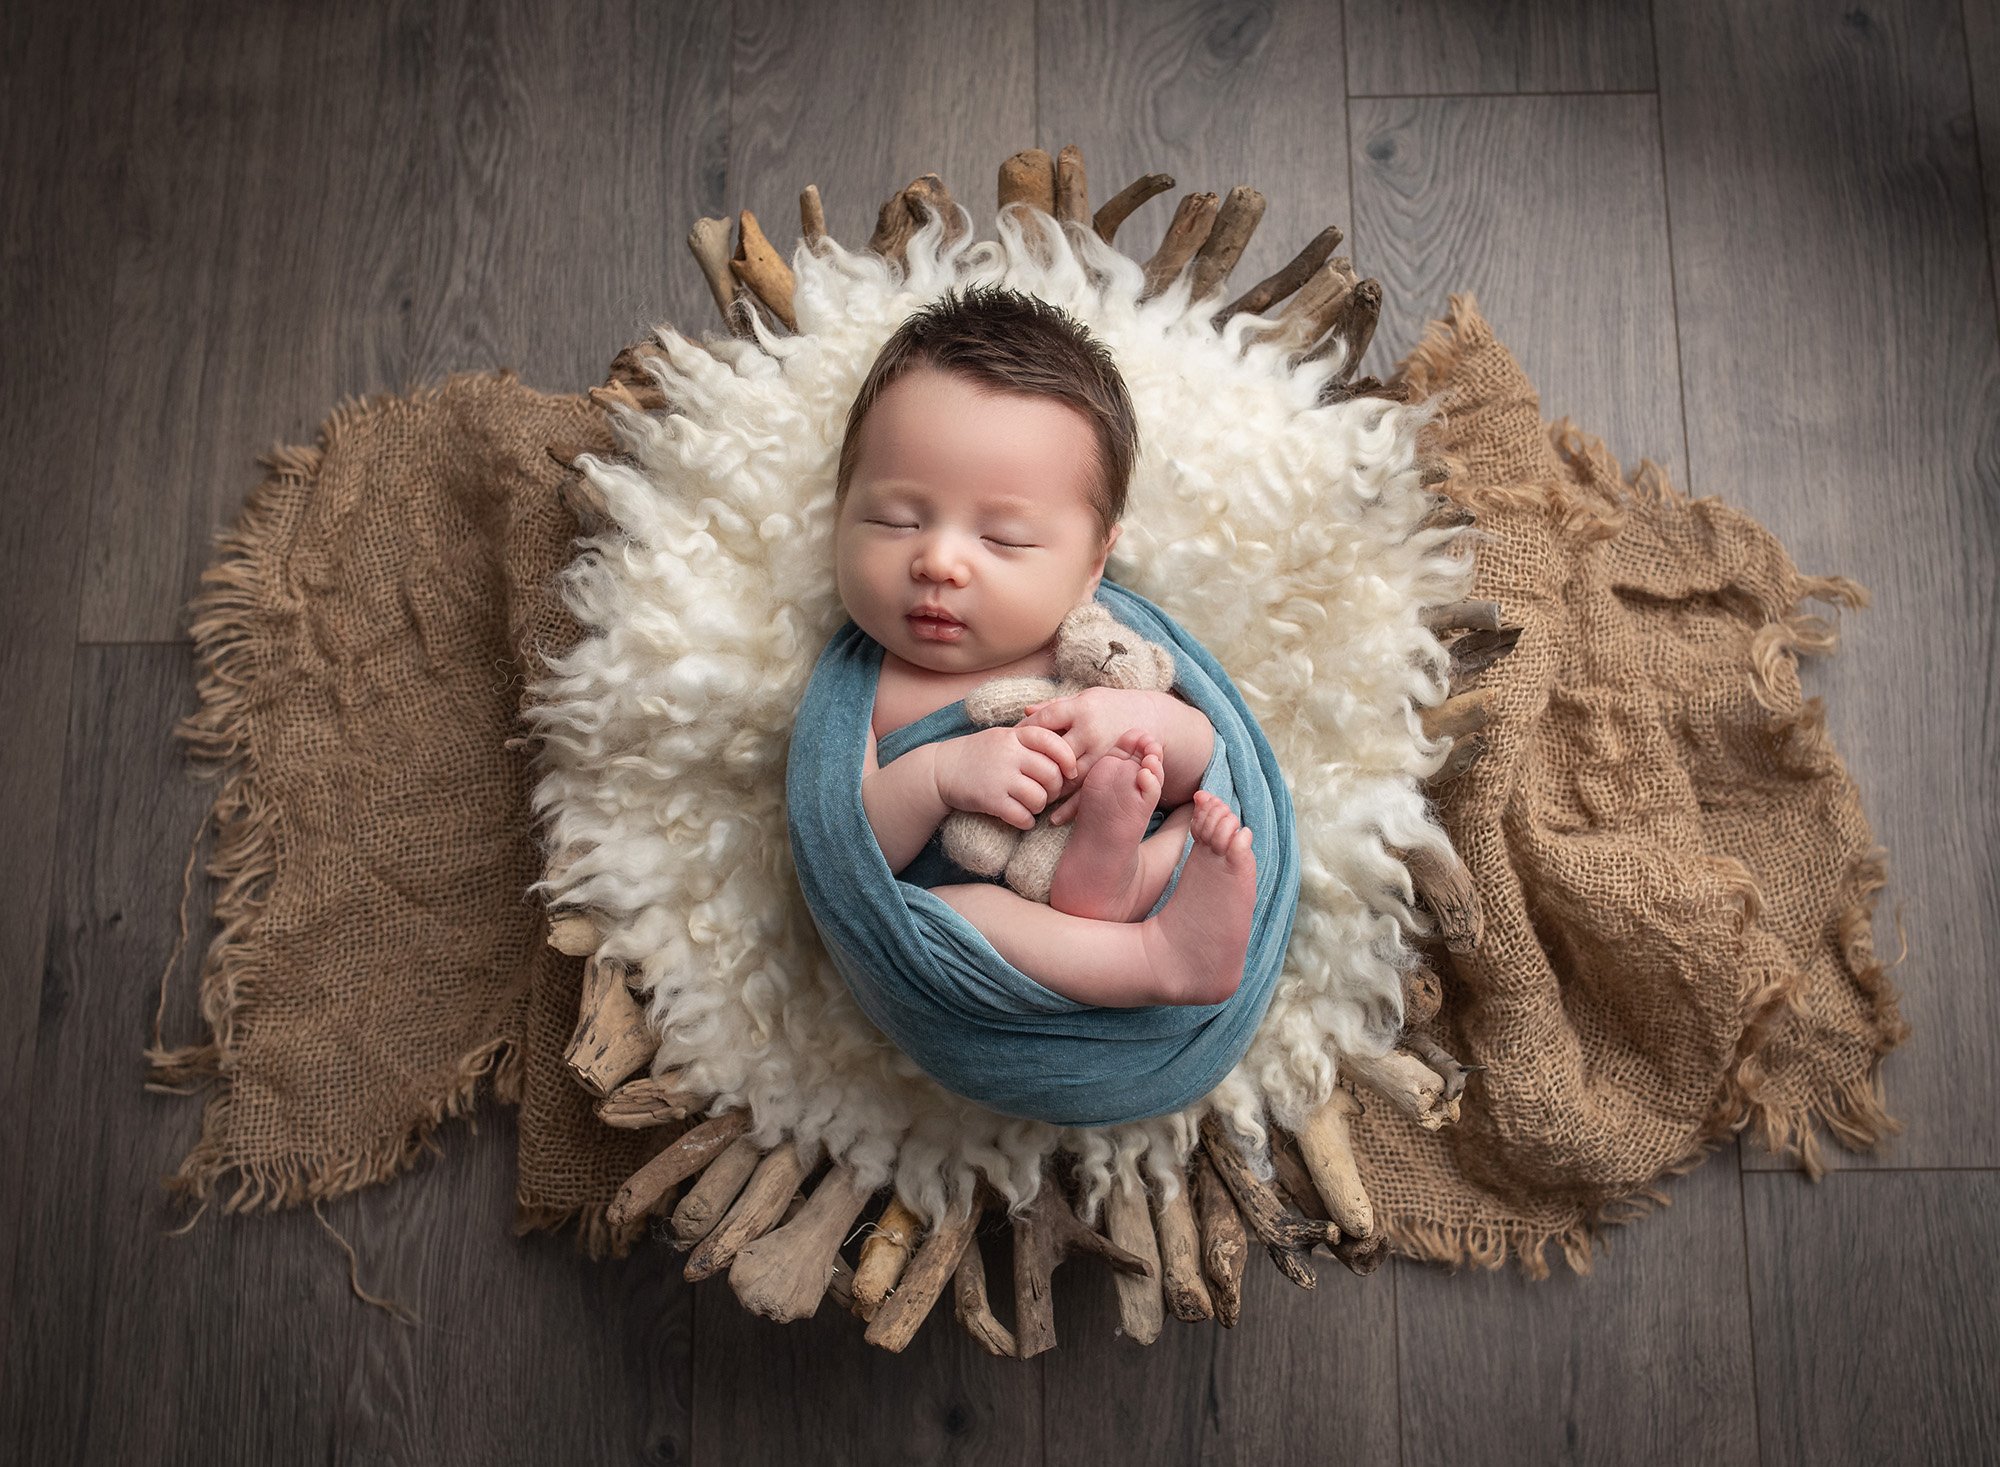 Classic Newborn Boy Photos with Props · Crabapple Photography, New Born 